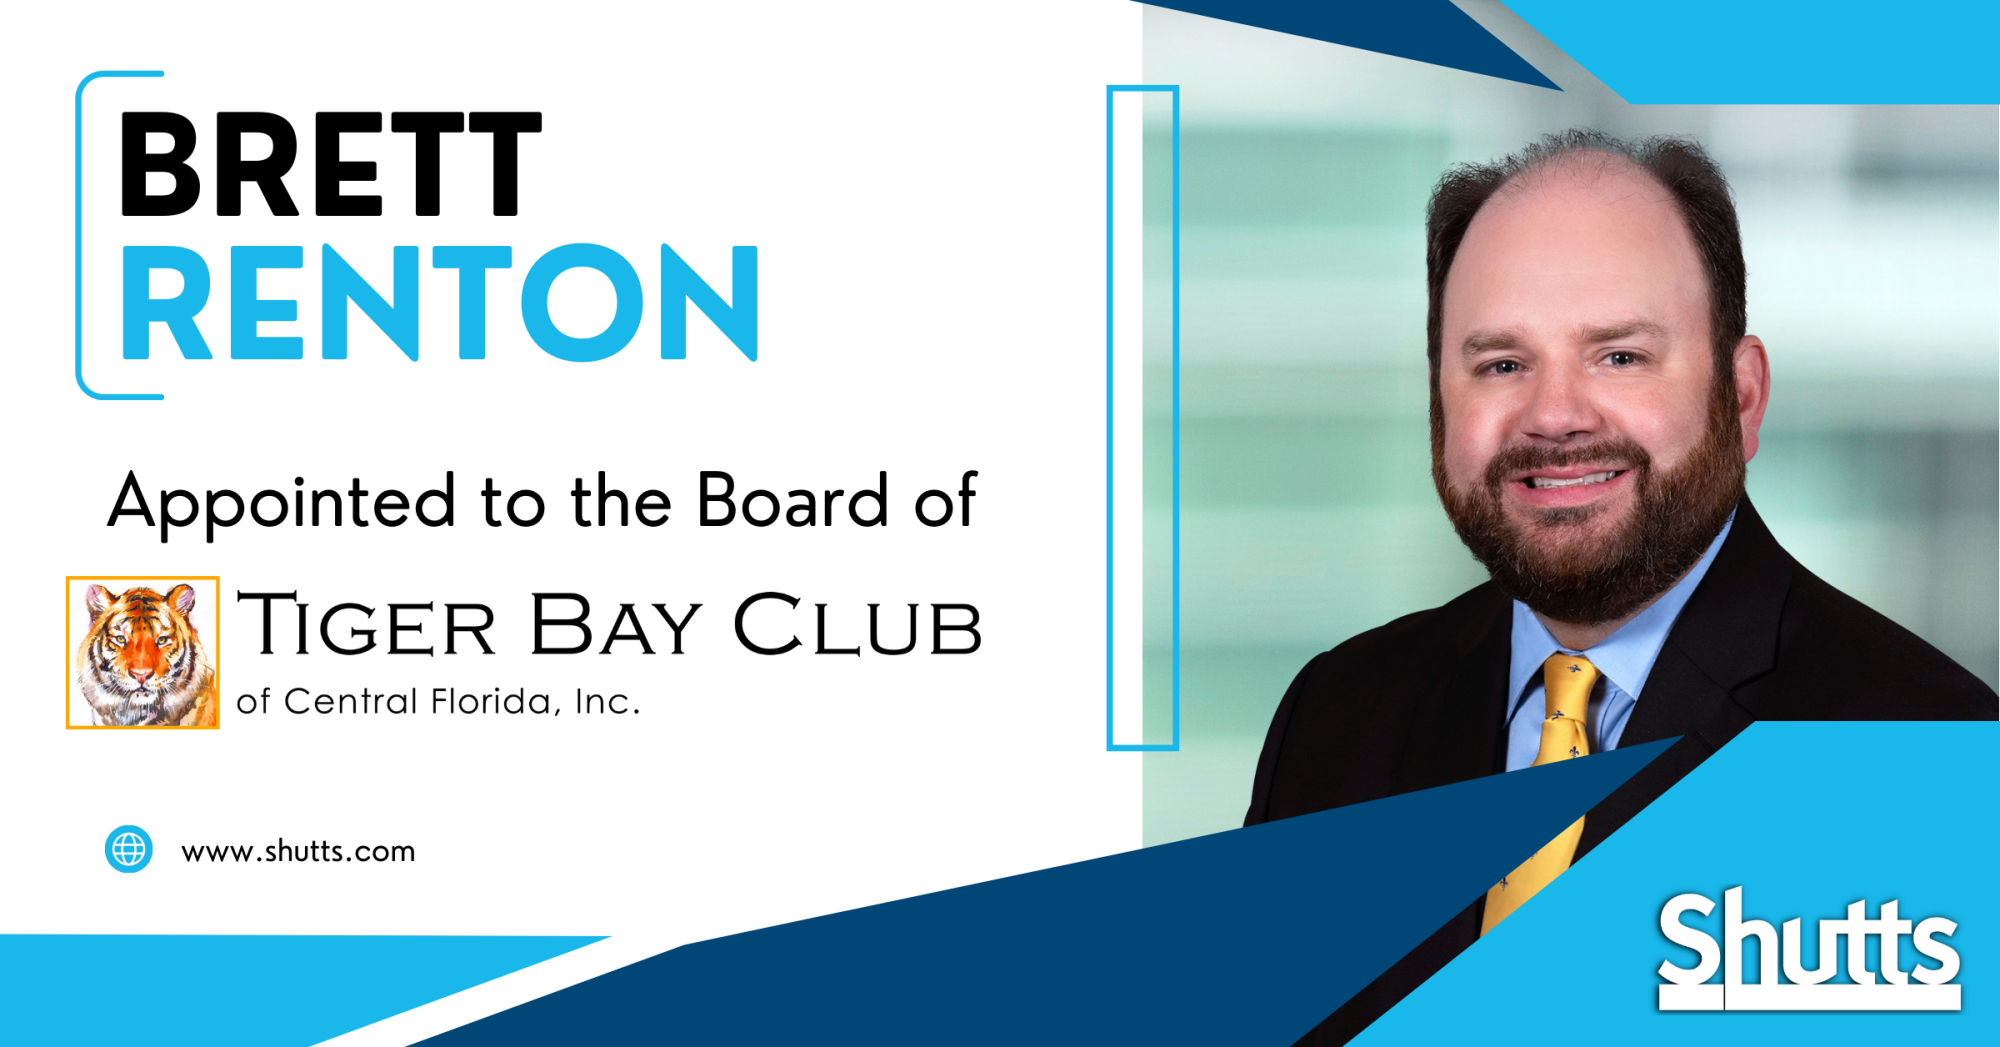 Brett Renton Appointed to the Board of Tiger Bay Club of Central Florida